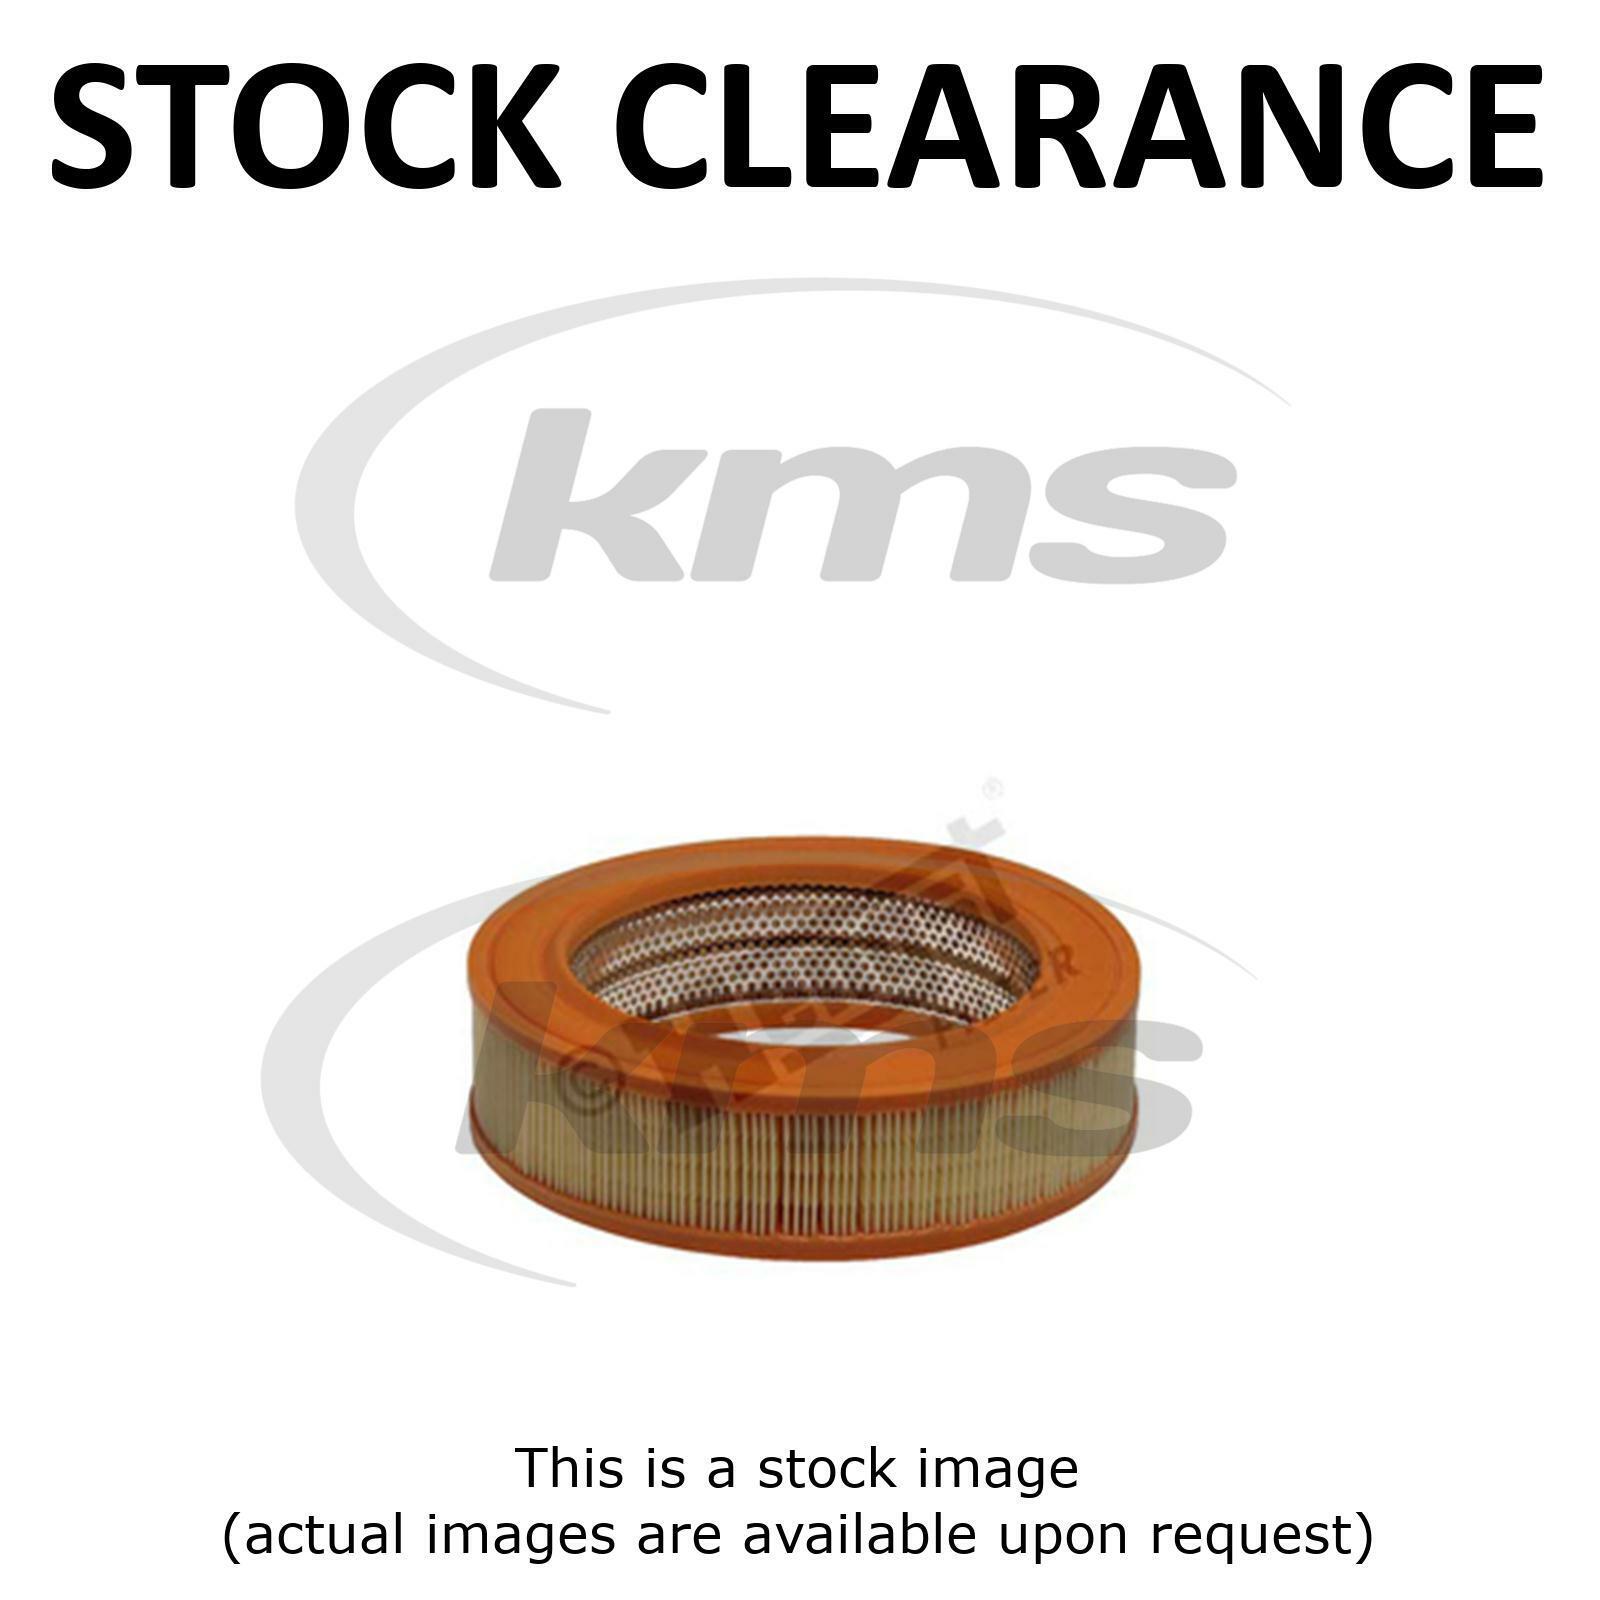 Stock Clearance AIR FILTER FOR W123 200-300 DIESEL -86/T1 210,310,410  82-96